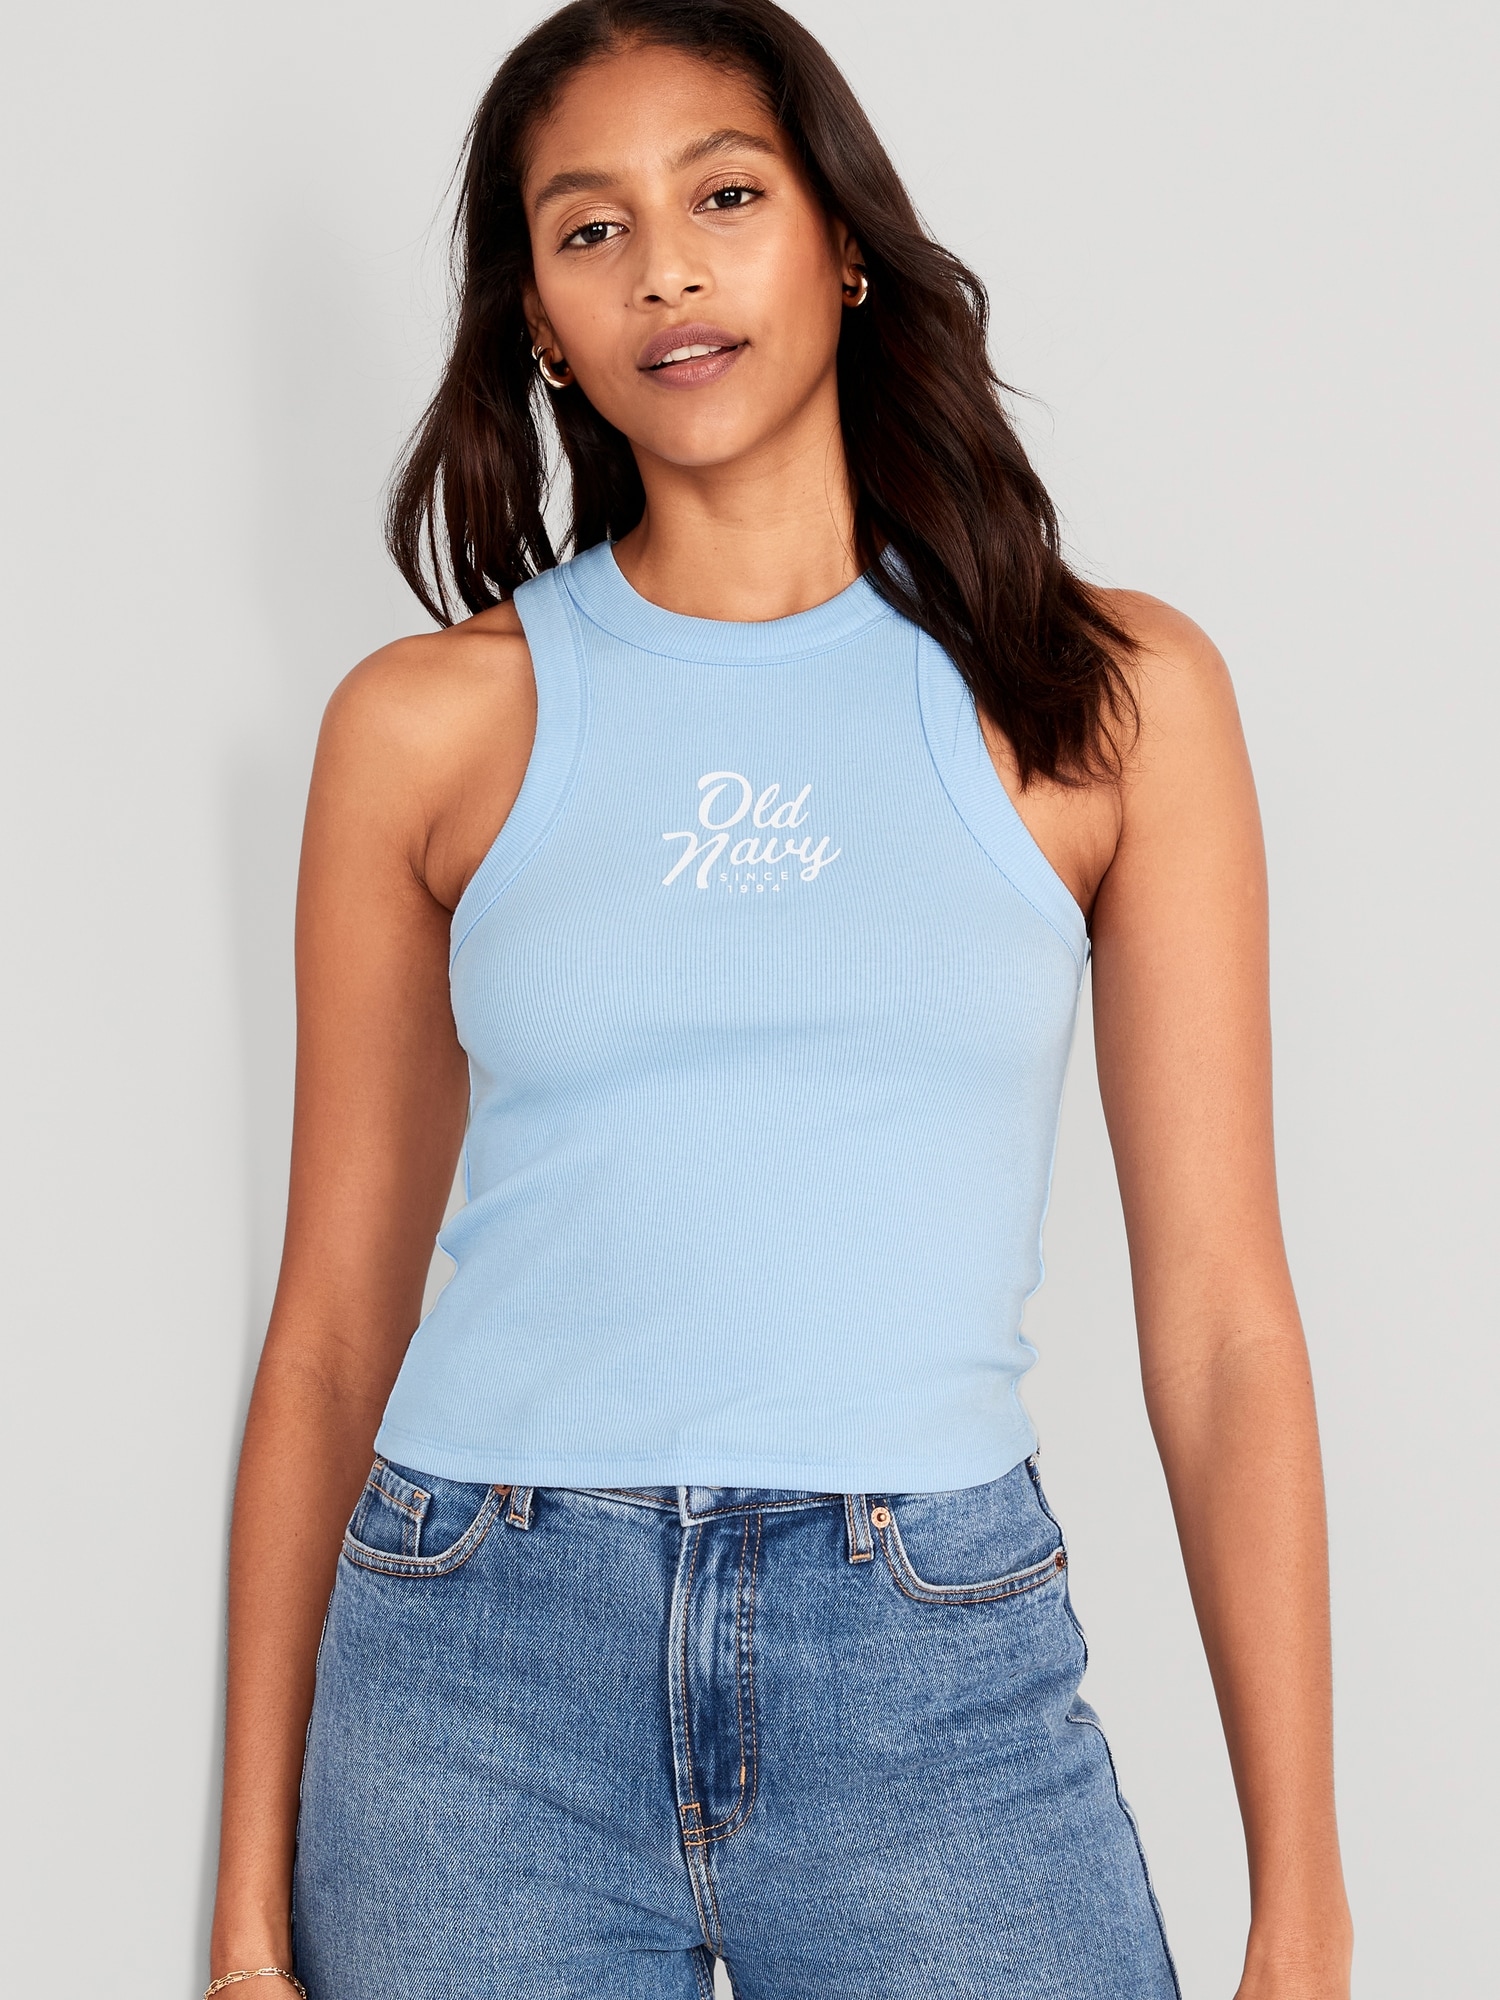 Women's Colored Tank Tops